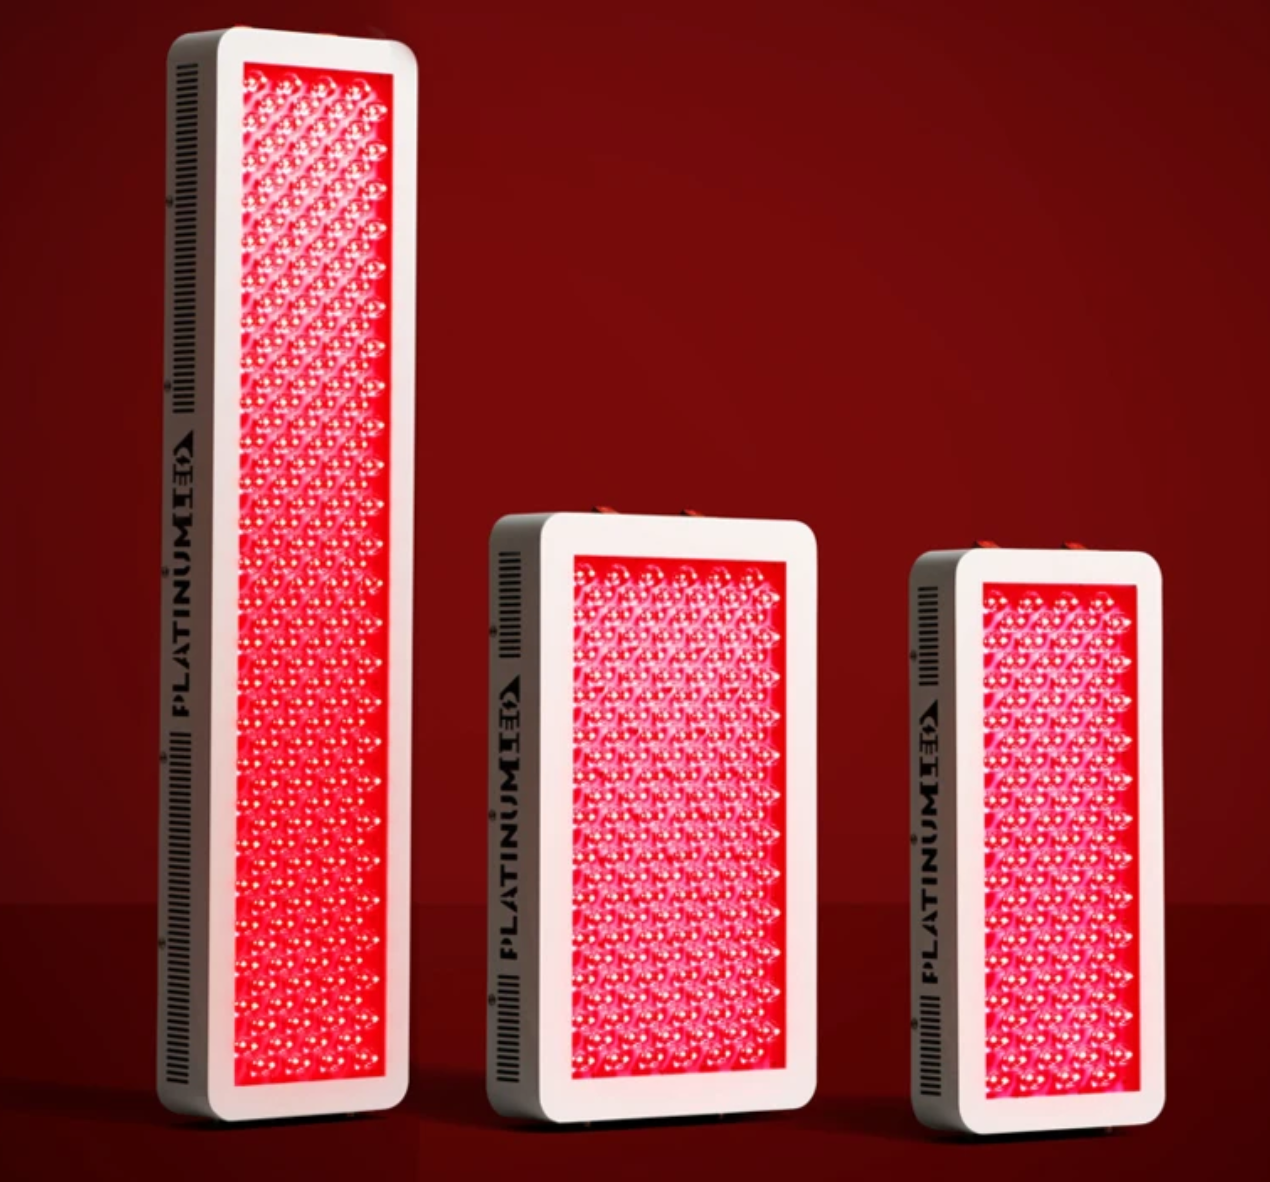 How Much Does Red Light Therapy Cost? – PlatinumLED Therapy Lights